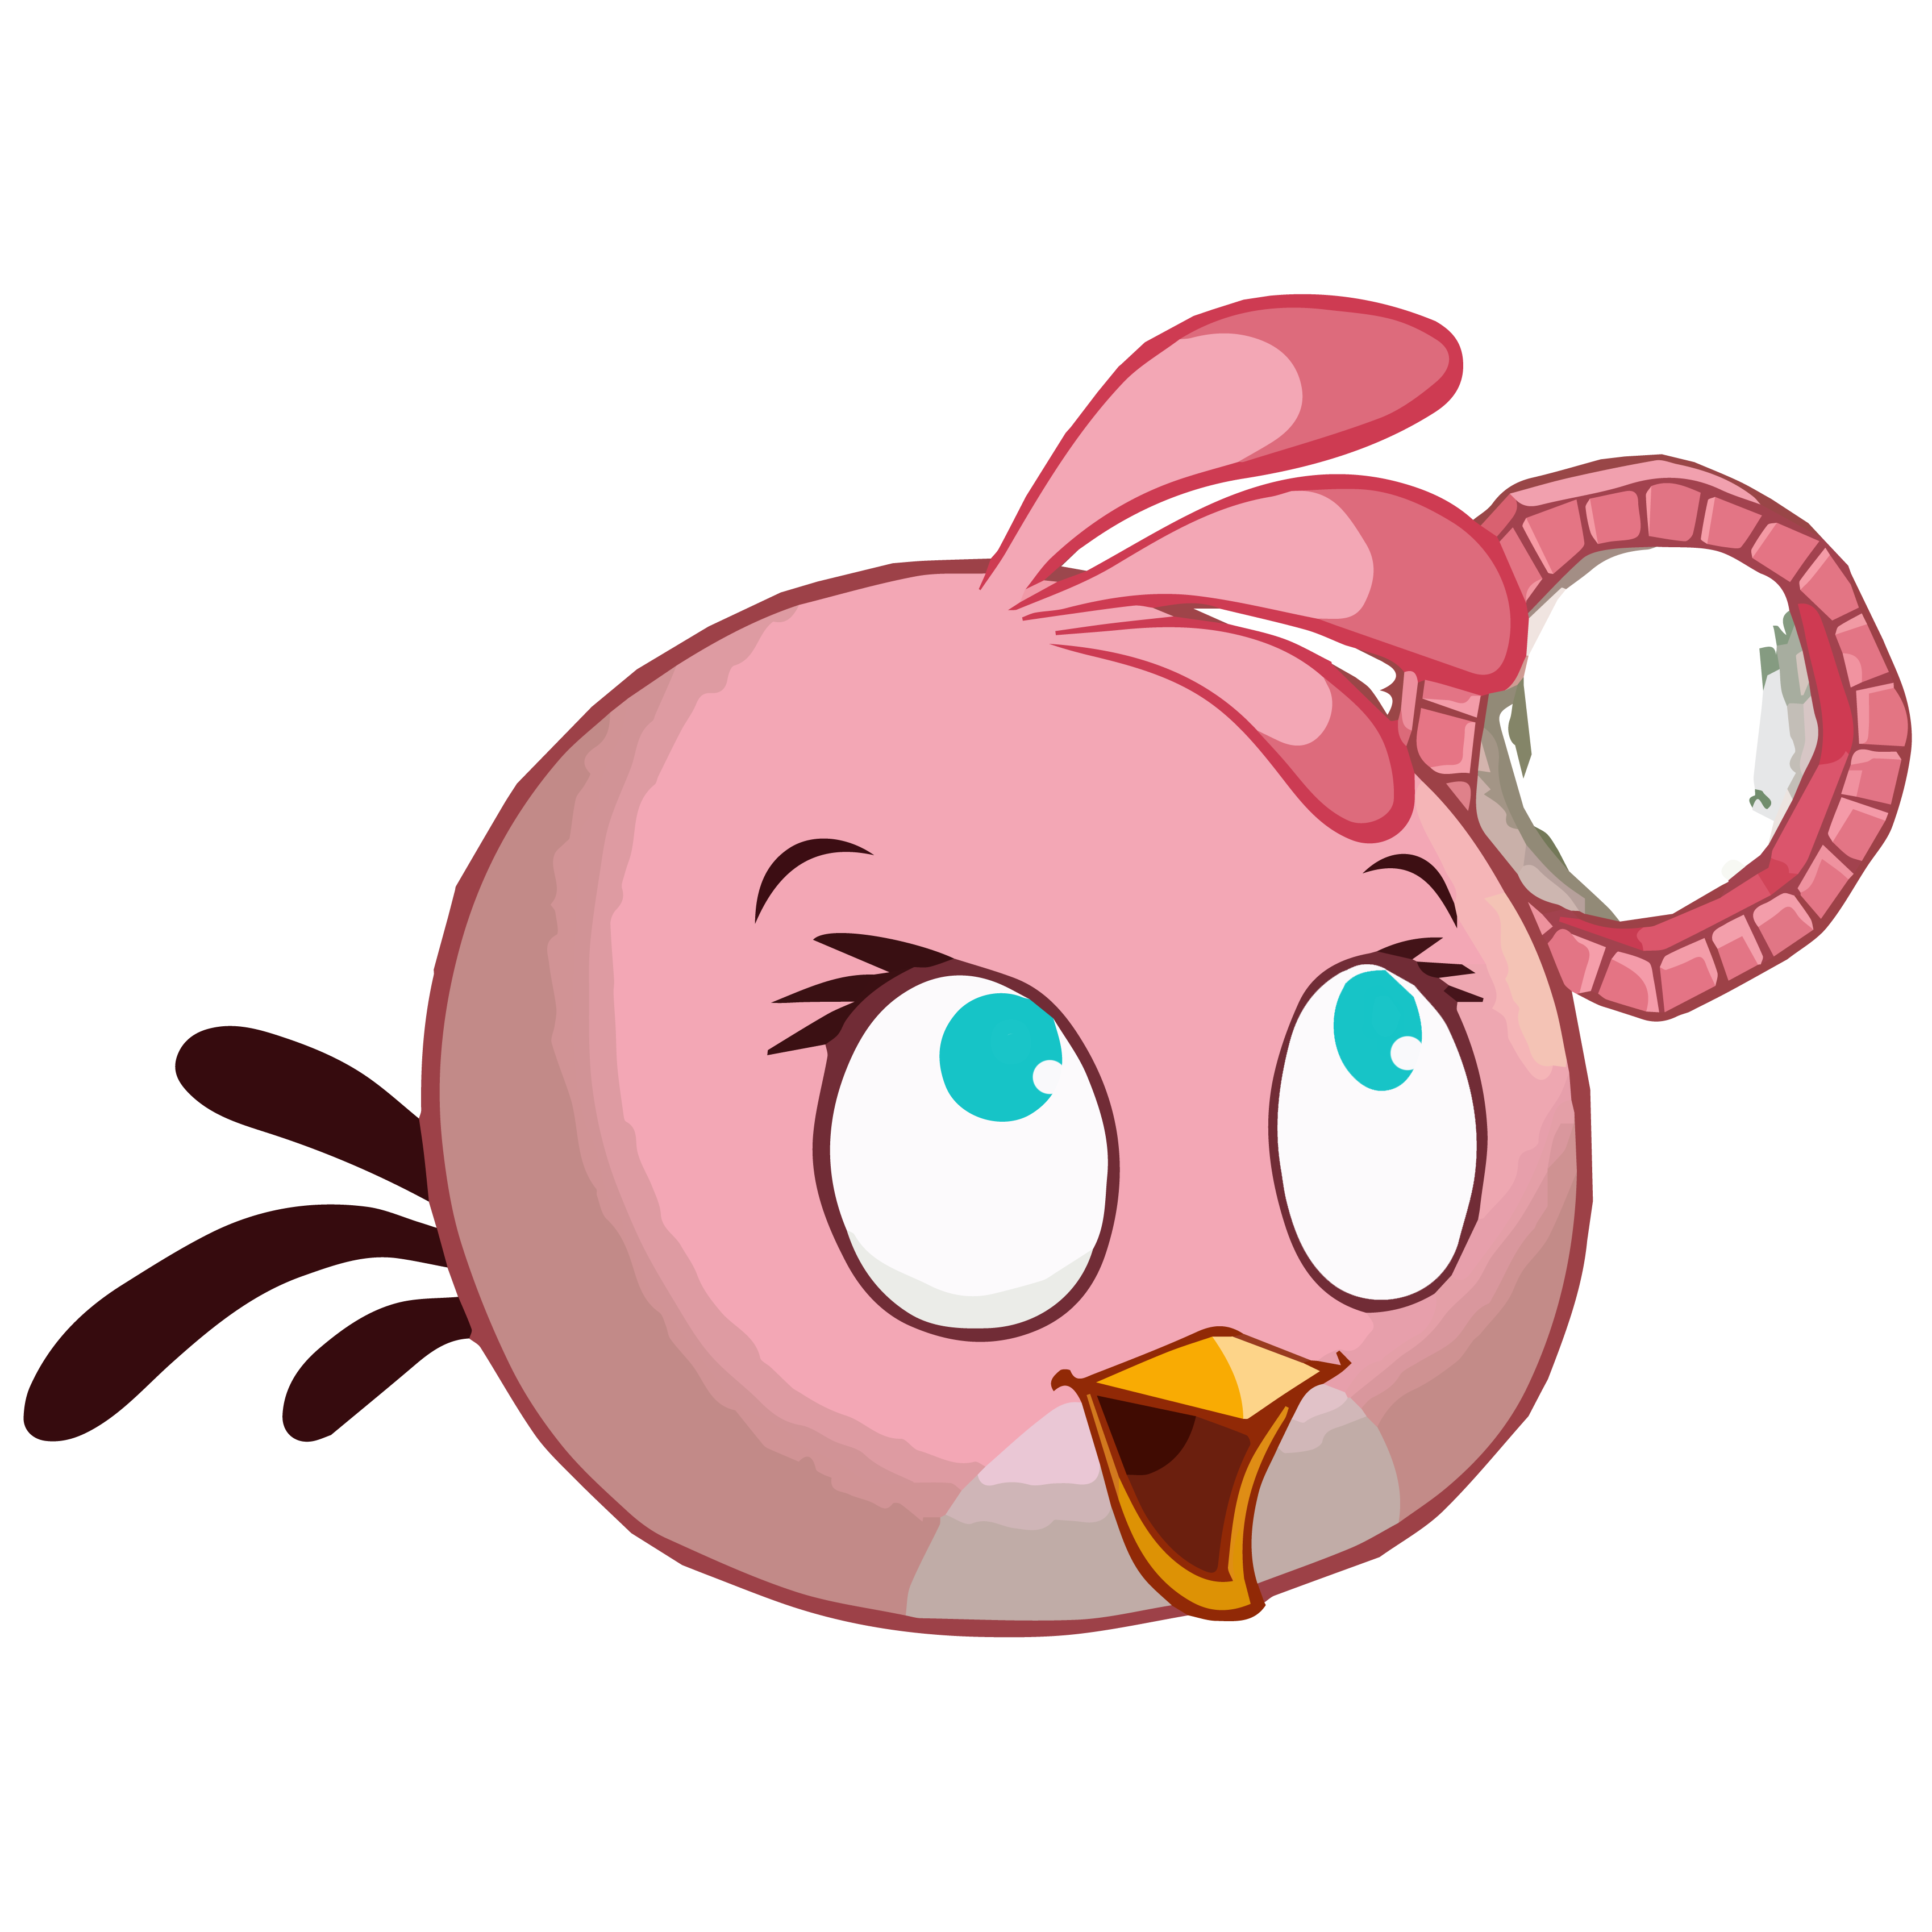 Angry Birds   Pink   Super High Quality  By Tomefc98 On Deviantart